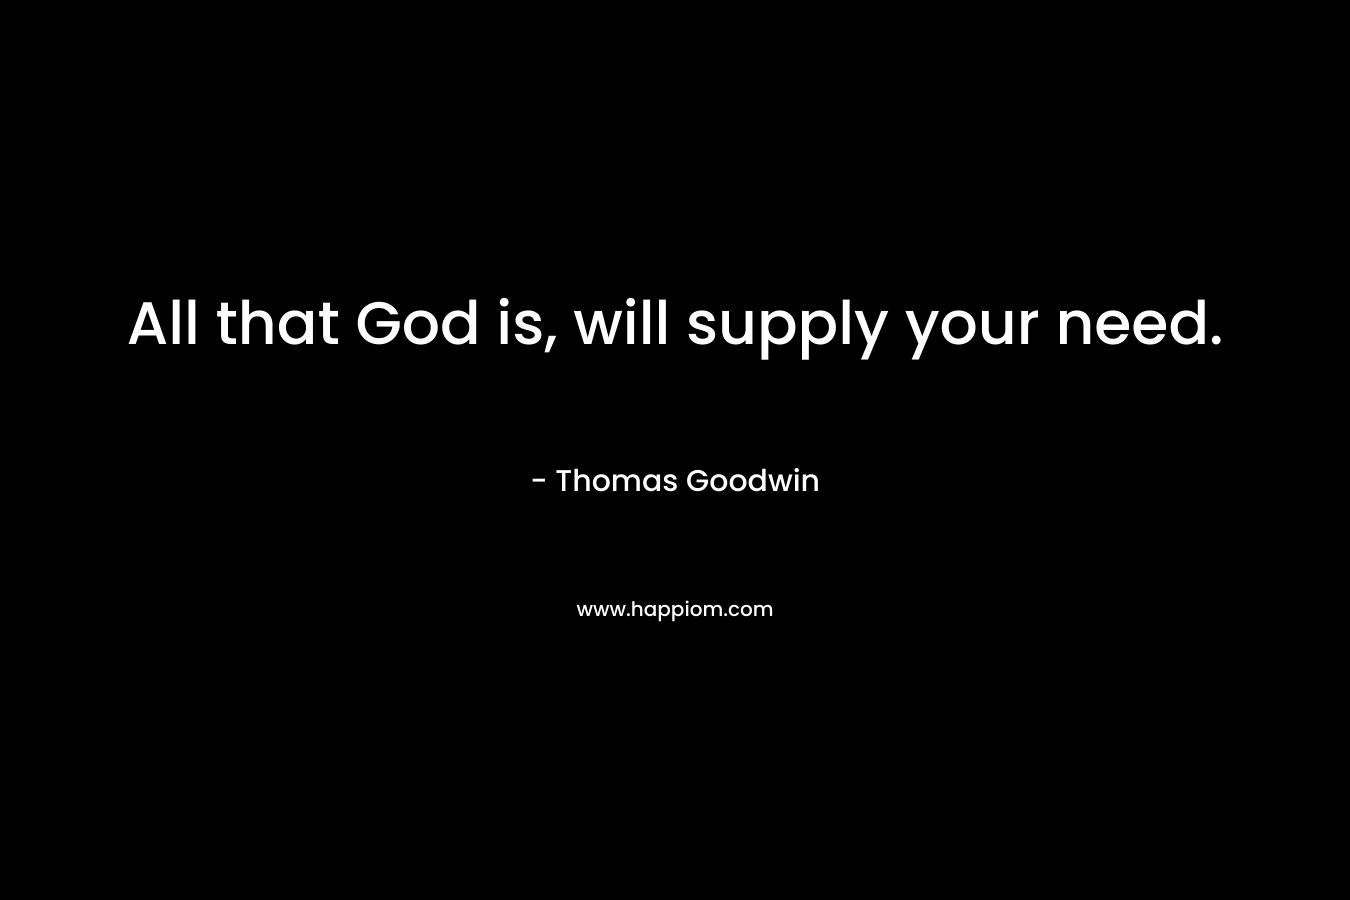 All that God is, will supply your need. – Thomas Goodwin